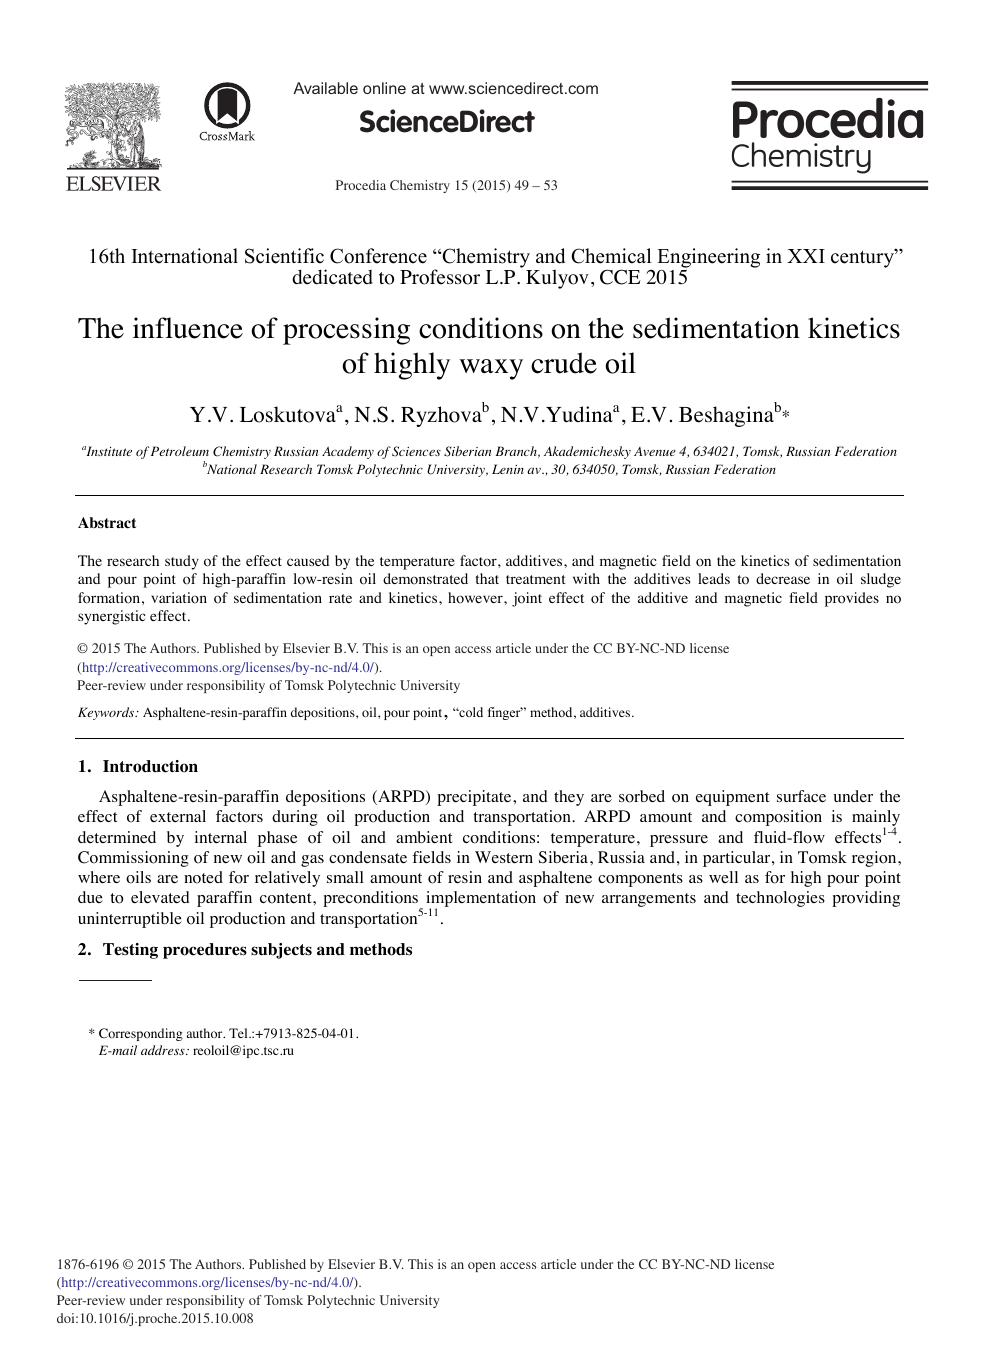 The Influence Of Processing Conditions On The Sedimentation Kinetics Of Highly Waxy Crude Oil Topic Of Research Paper In Materials Engineering Download Scholarly Article Pdf And Read For Free On Cyberleninka